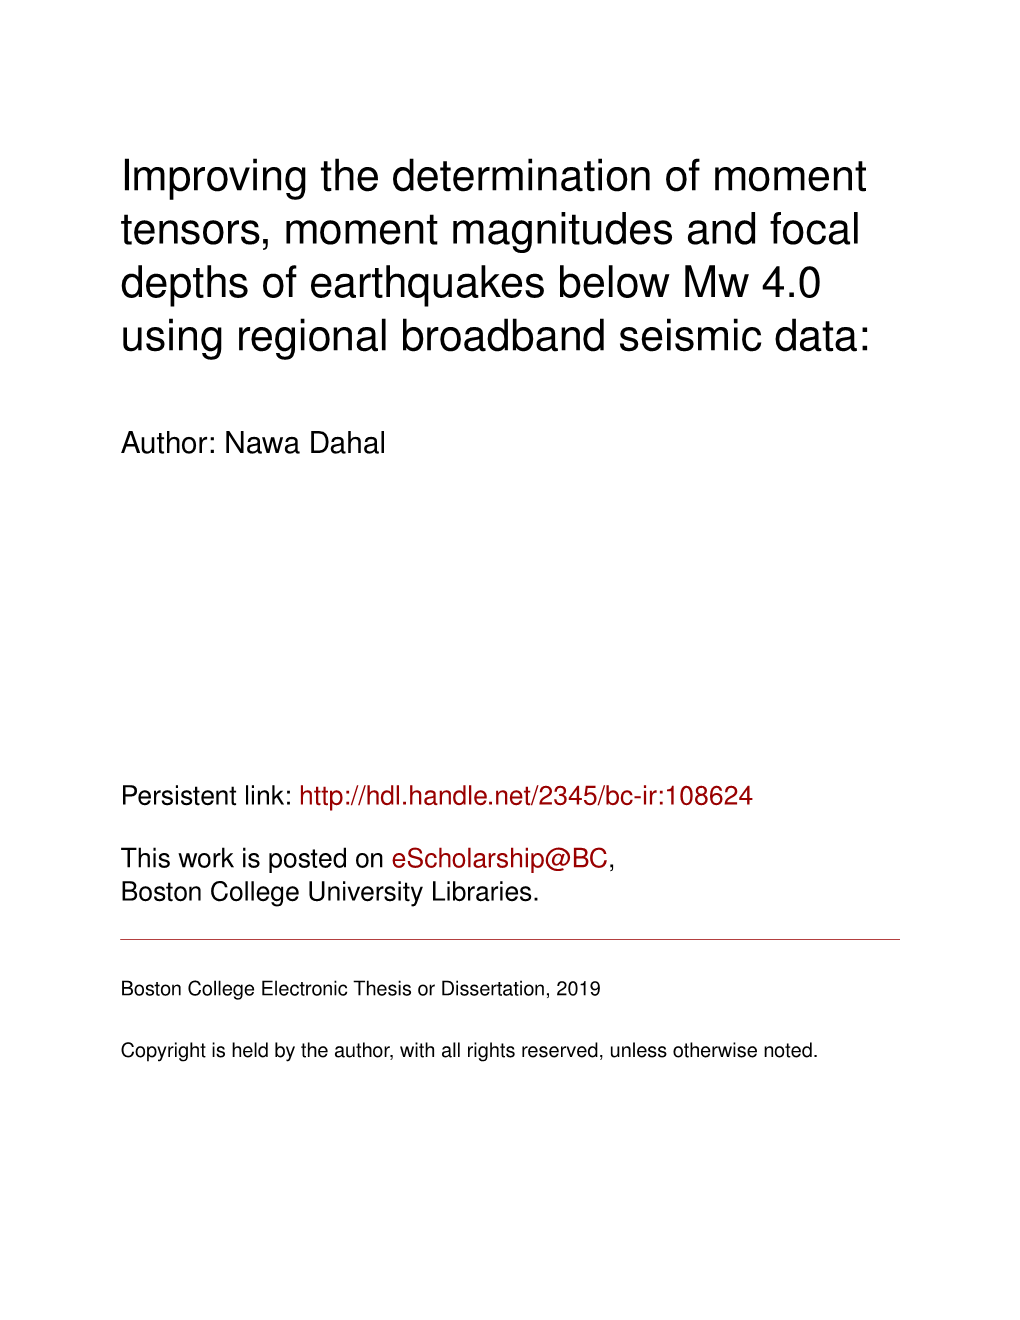 Improving the Determination of Moment Tensors, Moment Magnitudes and Focal Depths of Earthquakes Below Mw 4.0 Using Regional Broadband Seismic Data